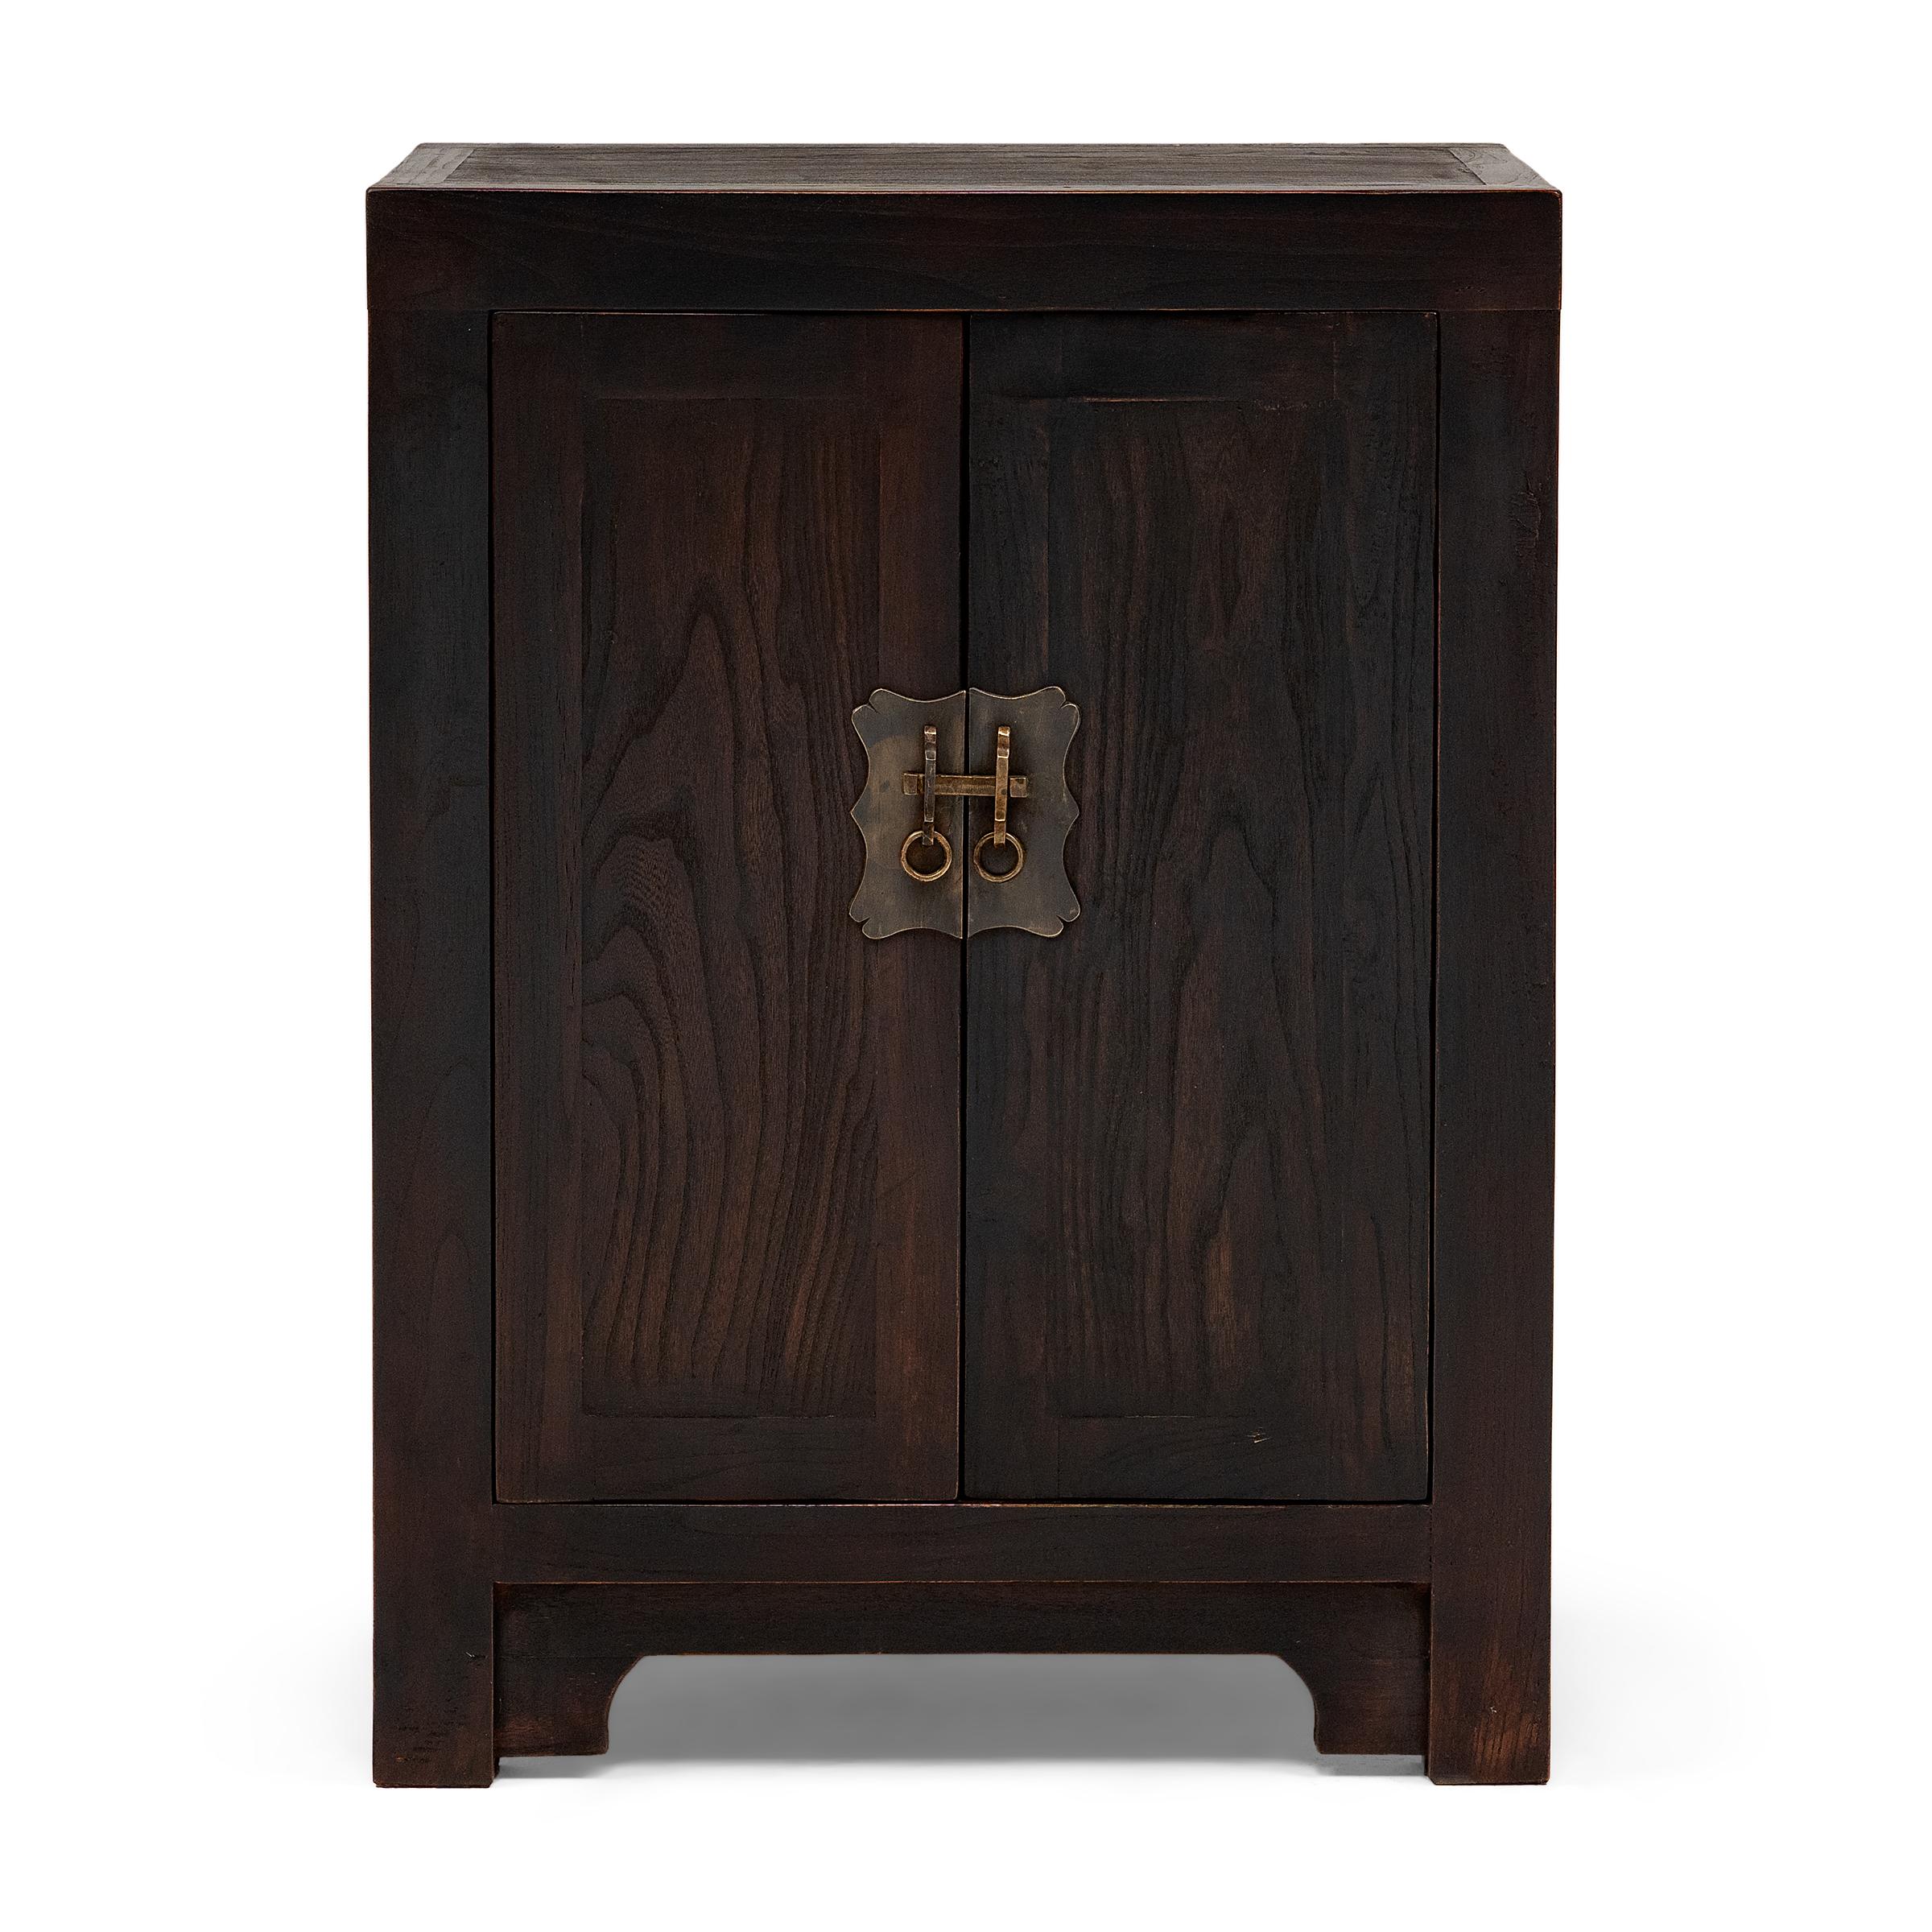 Perfecting line and proportion, the simple design of this pair of low locking chests celebrate the restraint of classic Chinese furniture forms. Crafted from reclaimed elmwood, the cabinets are modeled after those used for general storage in a